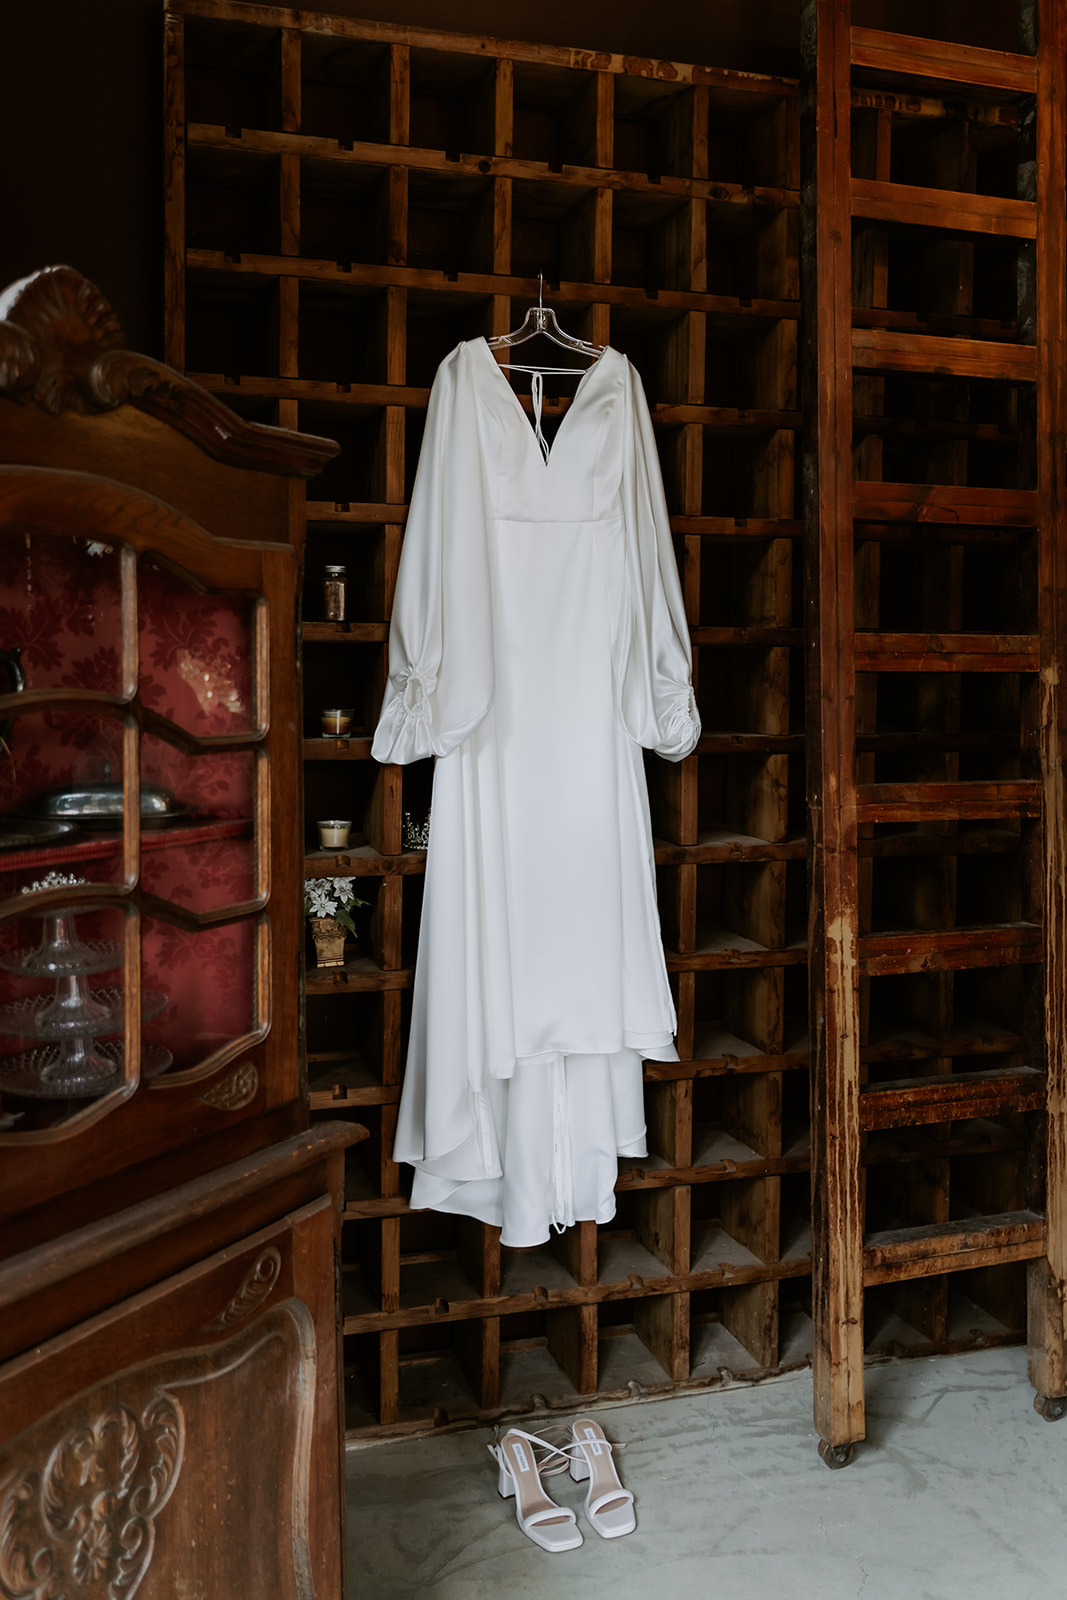 A white wedding dress and a pair of shoes hanging in front of a large wooden shelf with cubbies filled with various item